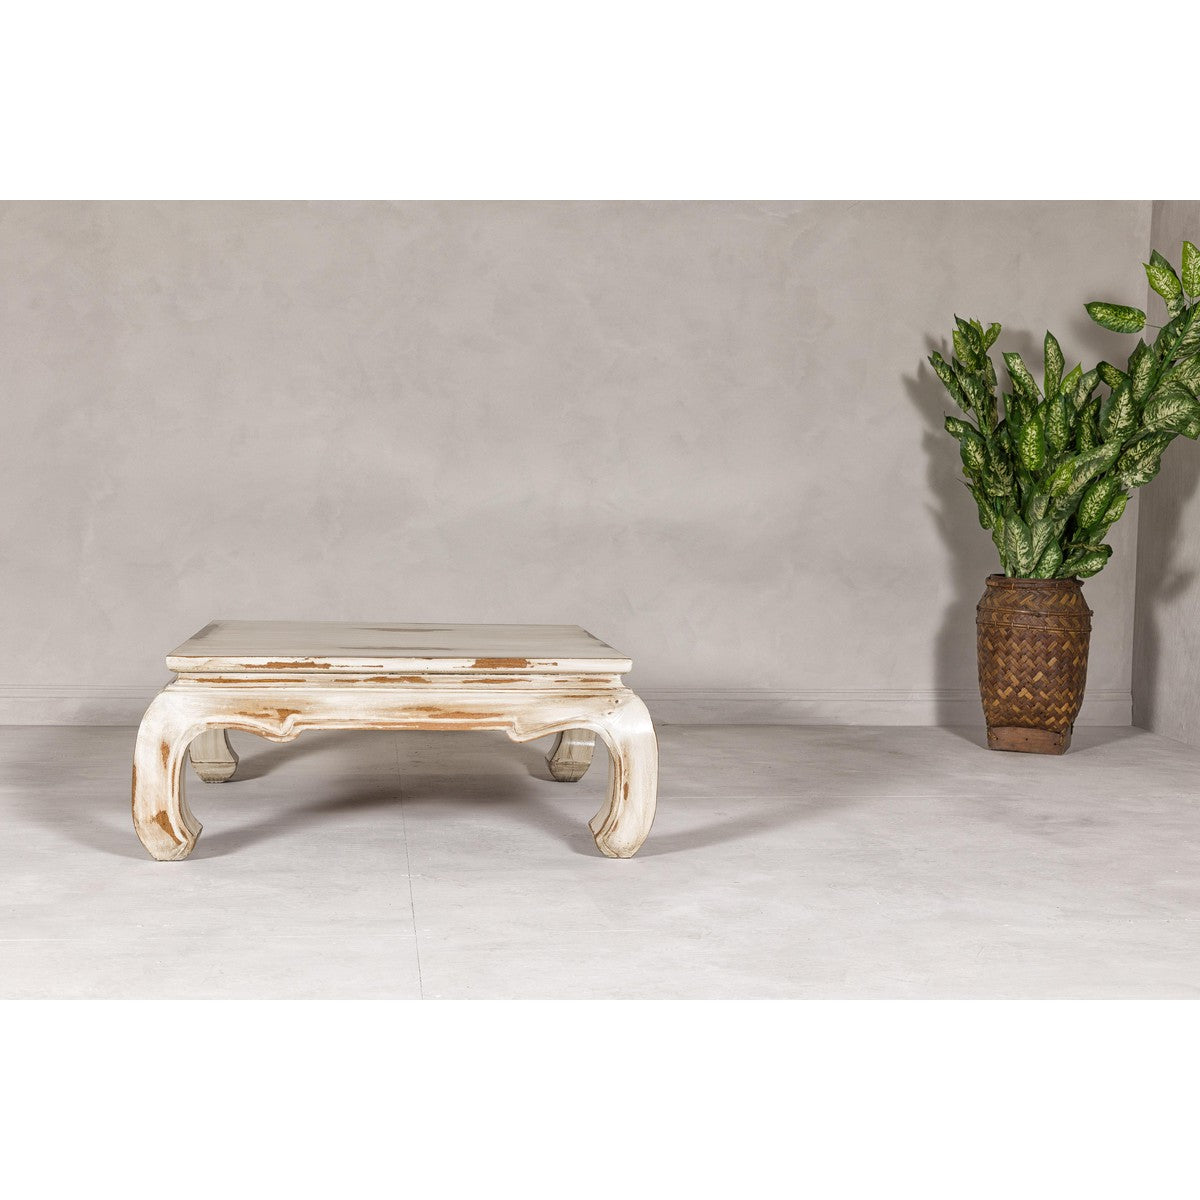 Distressed White Coffee Table with Chow Legs and Square Top, Vintage-YN7957-2. Asian & Chinese Furniture, Art, Antiques, Vintage Home Décor for sale at FEA Home